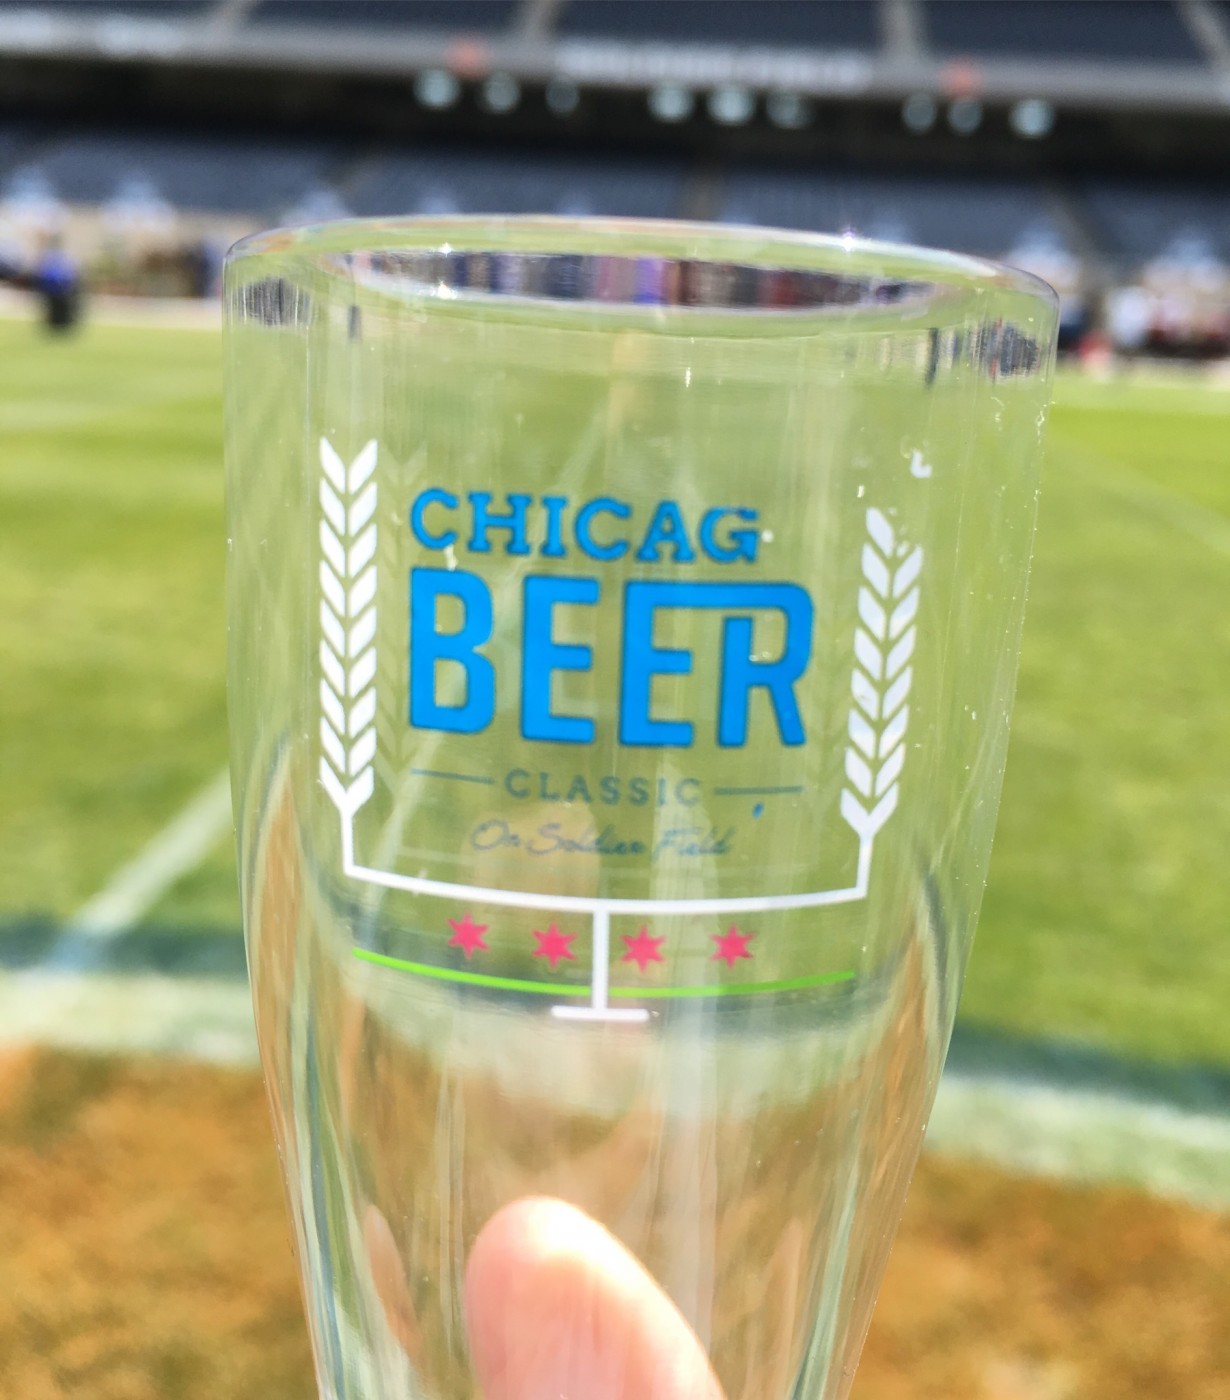 The tasting glass for this year's Chicago Beer Classic. Mine was missing the 'O'